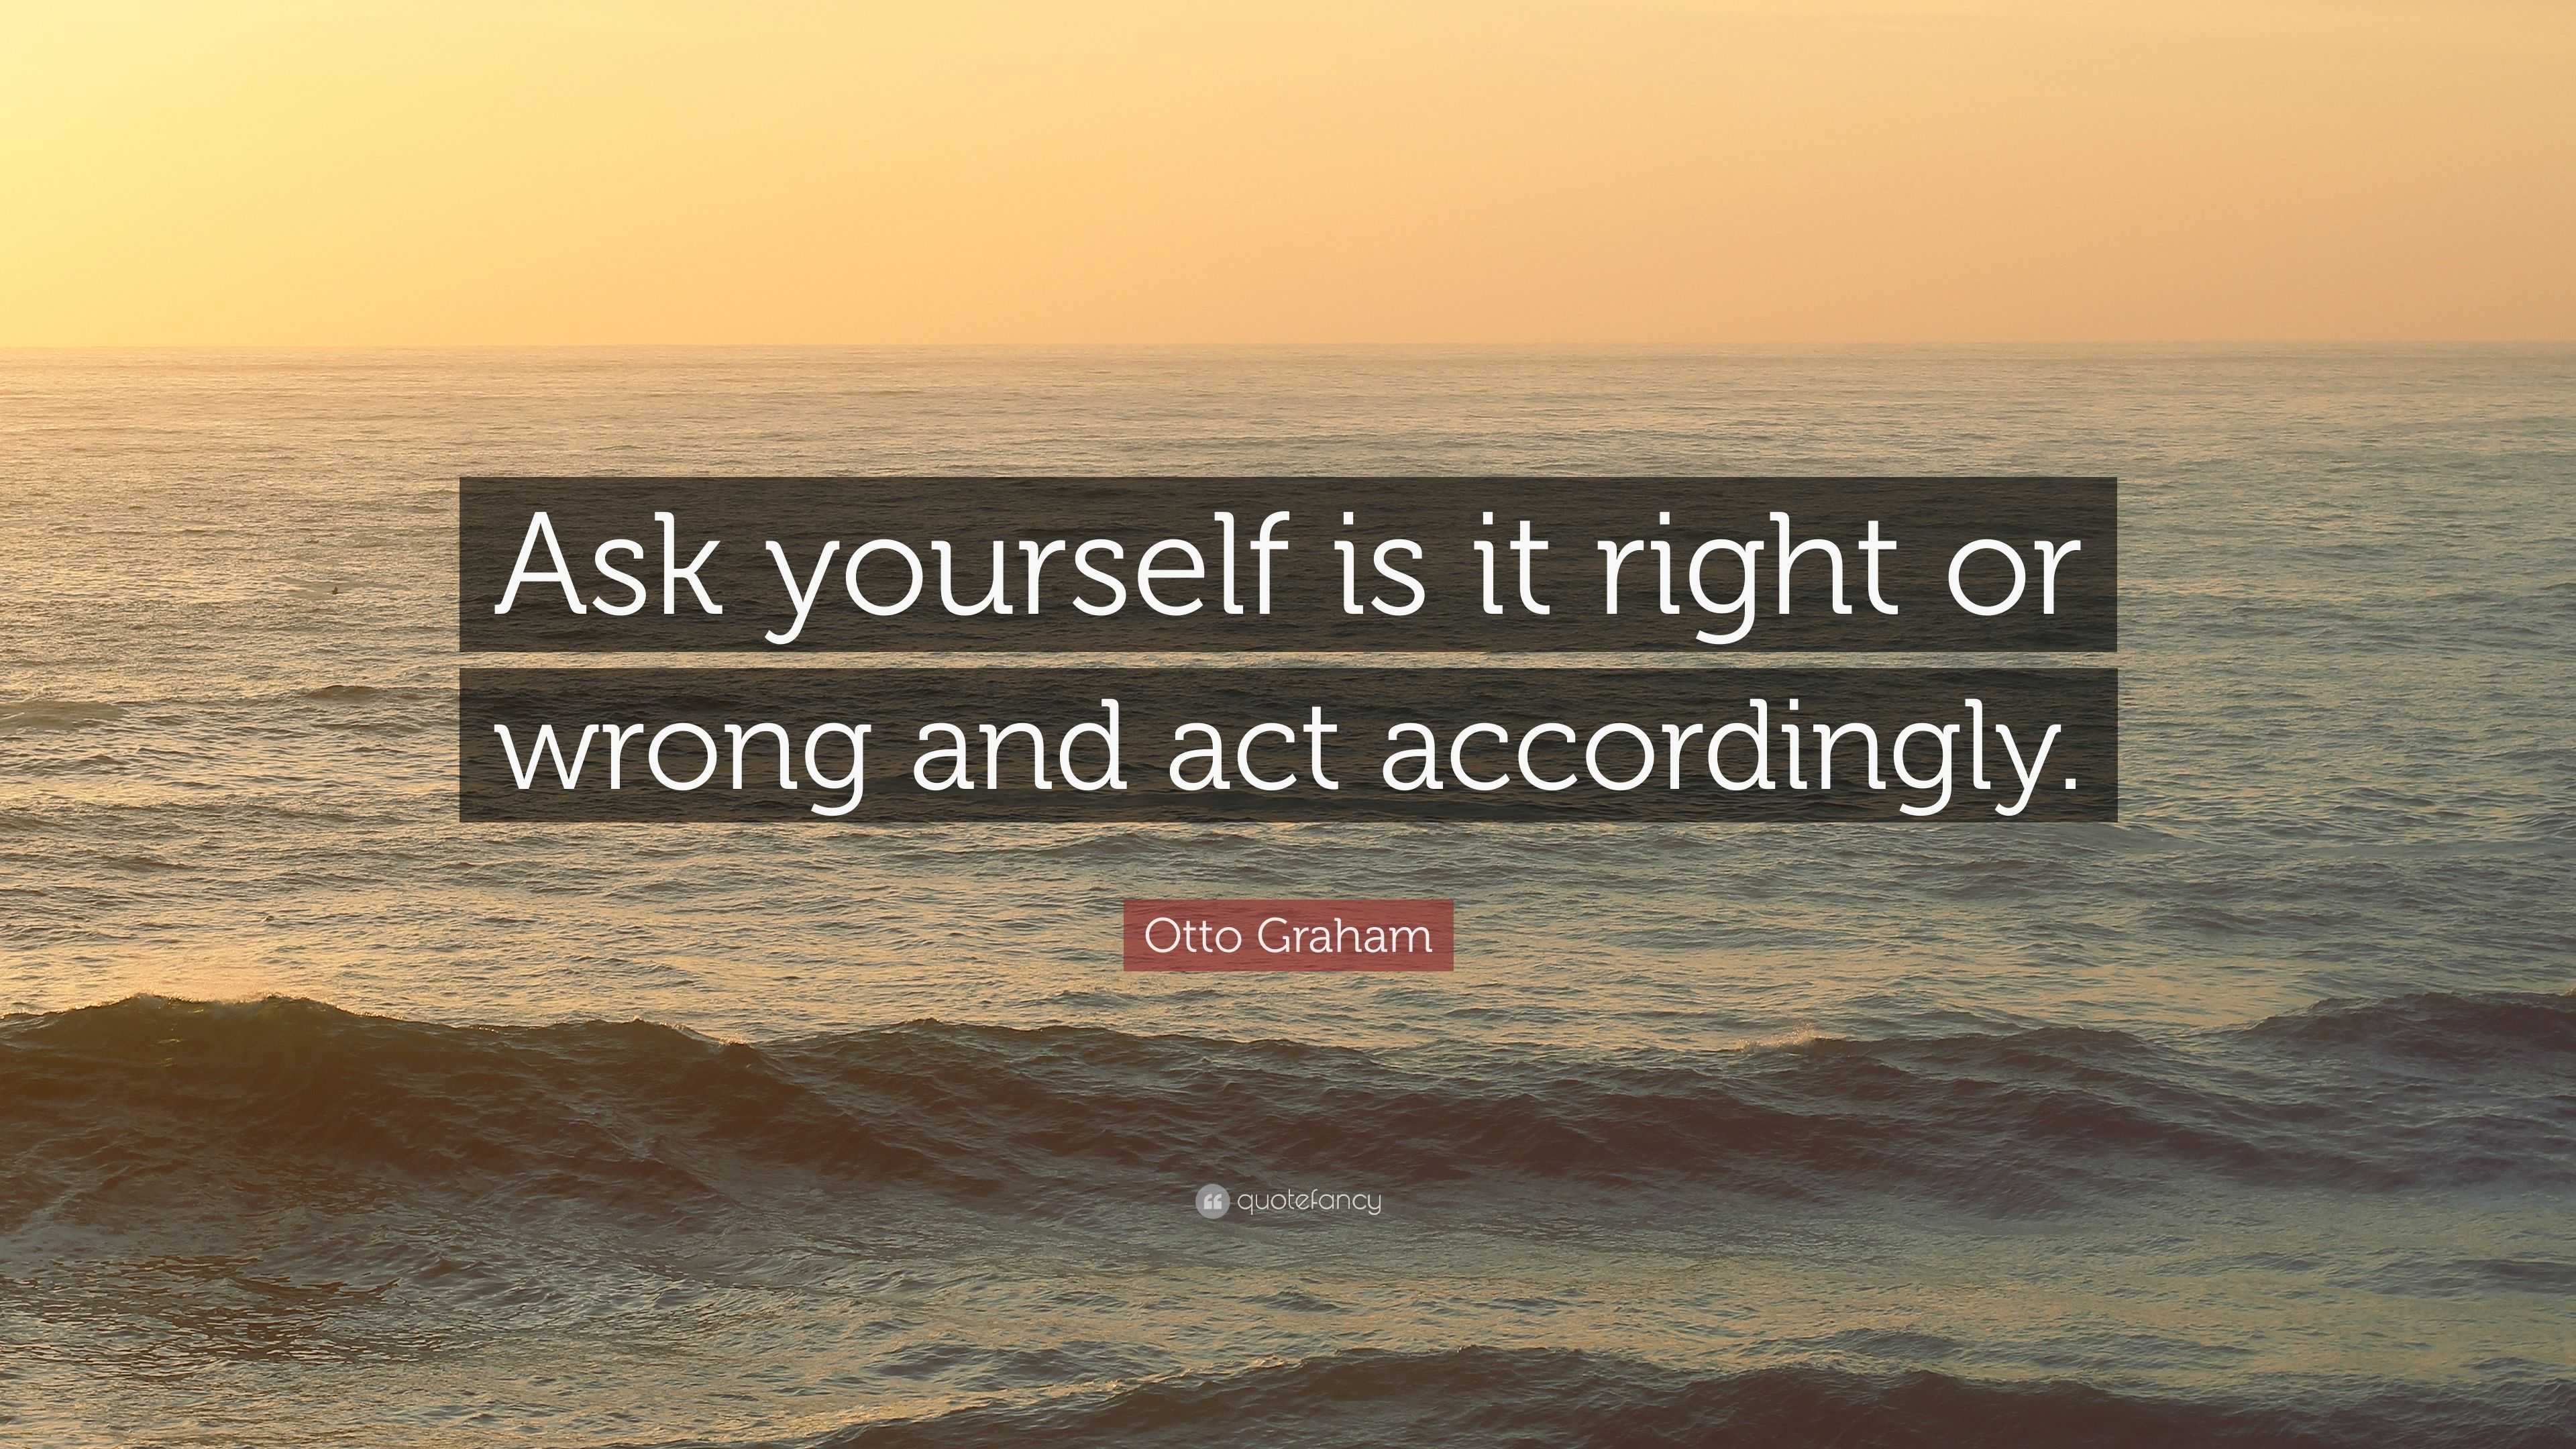 Otto Graham Quote: "Ask yourself is it right or wrong and act accordingly."